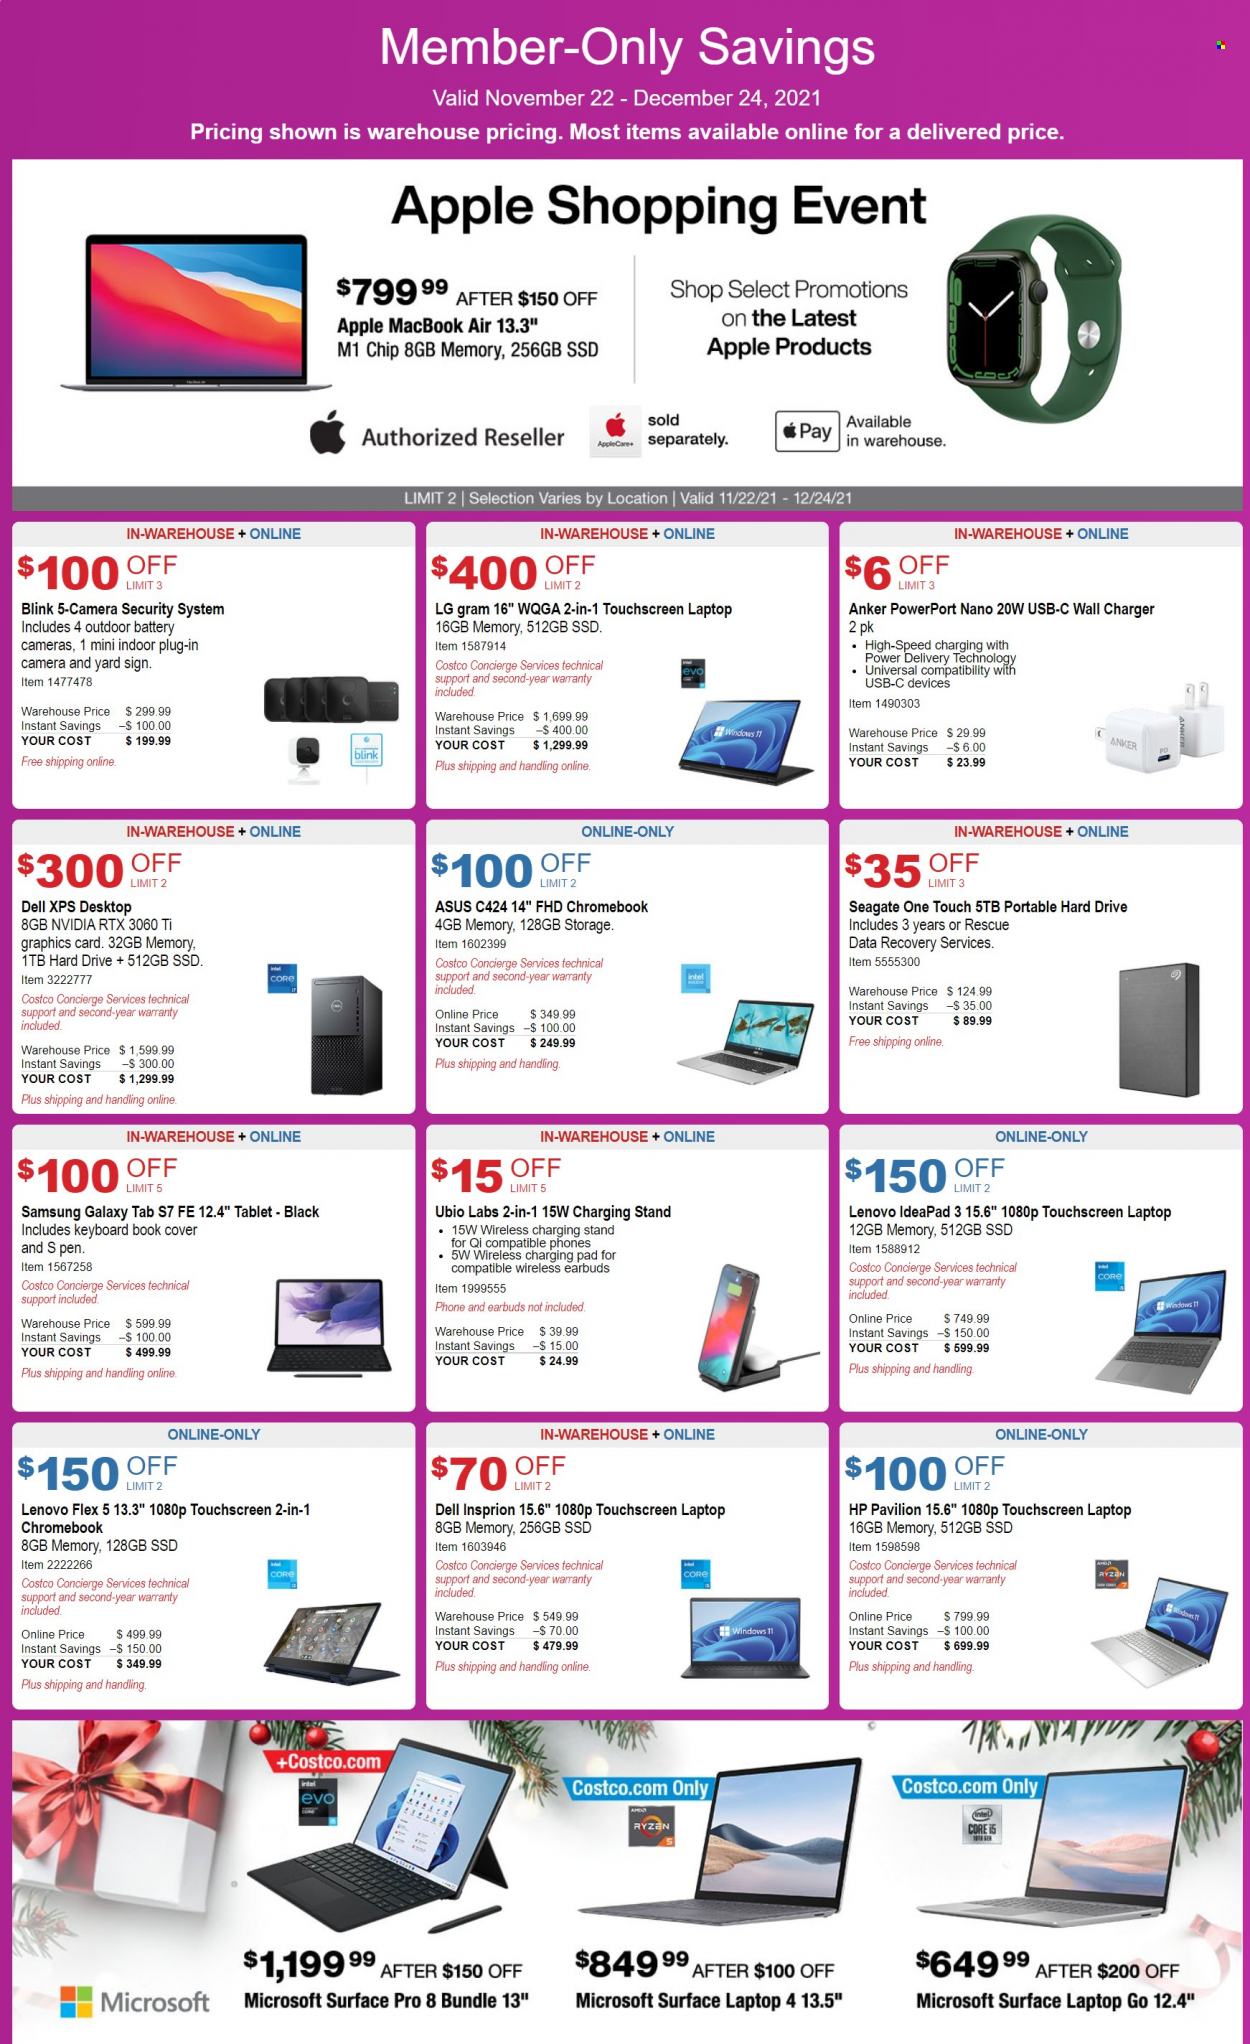 thumbnail - Costco Flyer - 11/22/2021 - 12/24/2021 - Sales products - Dell, LG, Intel, Apple, Asus, Lenovo, tablet, Hewlett Packard, Samsung Galaxy, Samsung Galaxy Tab, Yard, wall charger, pen, Anker, keyboard, Samsung, phone, charging stand, laptop, chromebook, MacBook, MacBook Air, touchscreen laptop, Ryzen, Seagate, hard disk, portable hard drive, earbuds, window. Page 1.